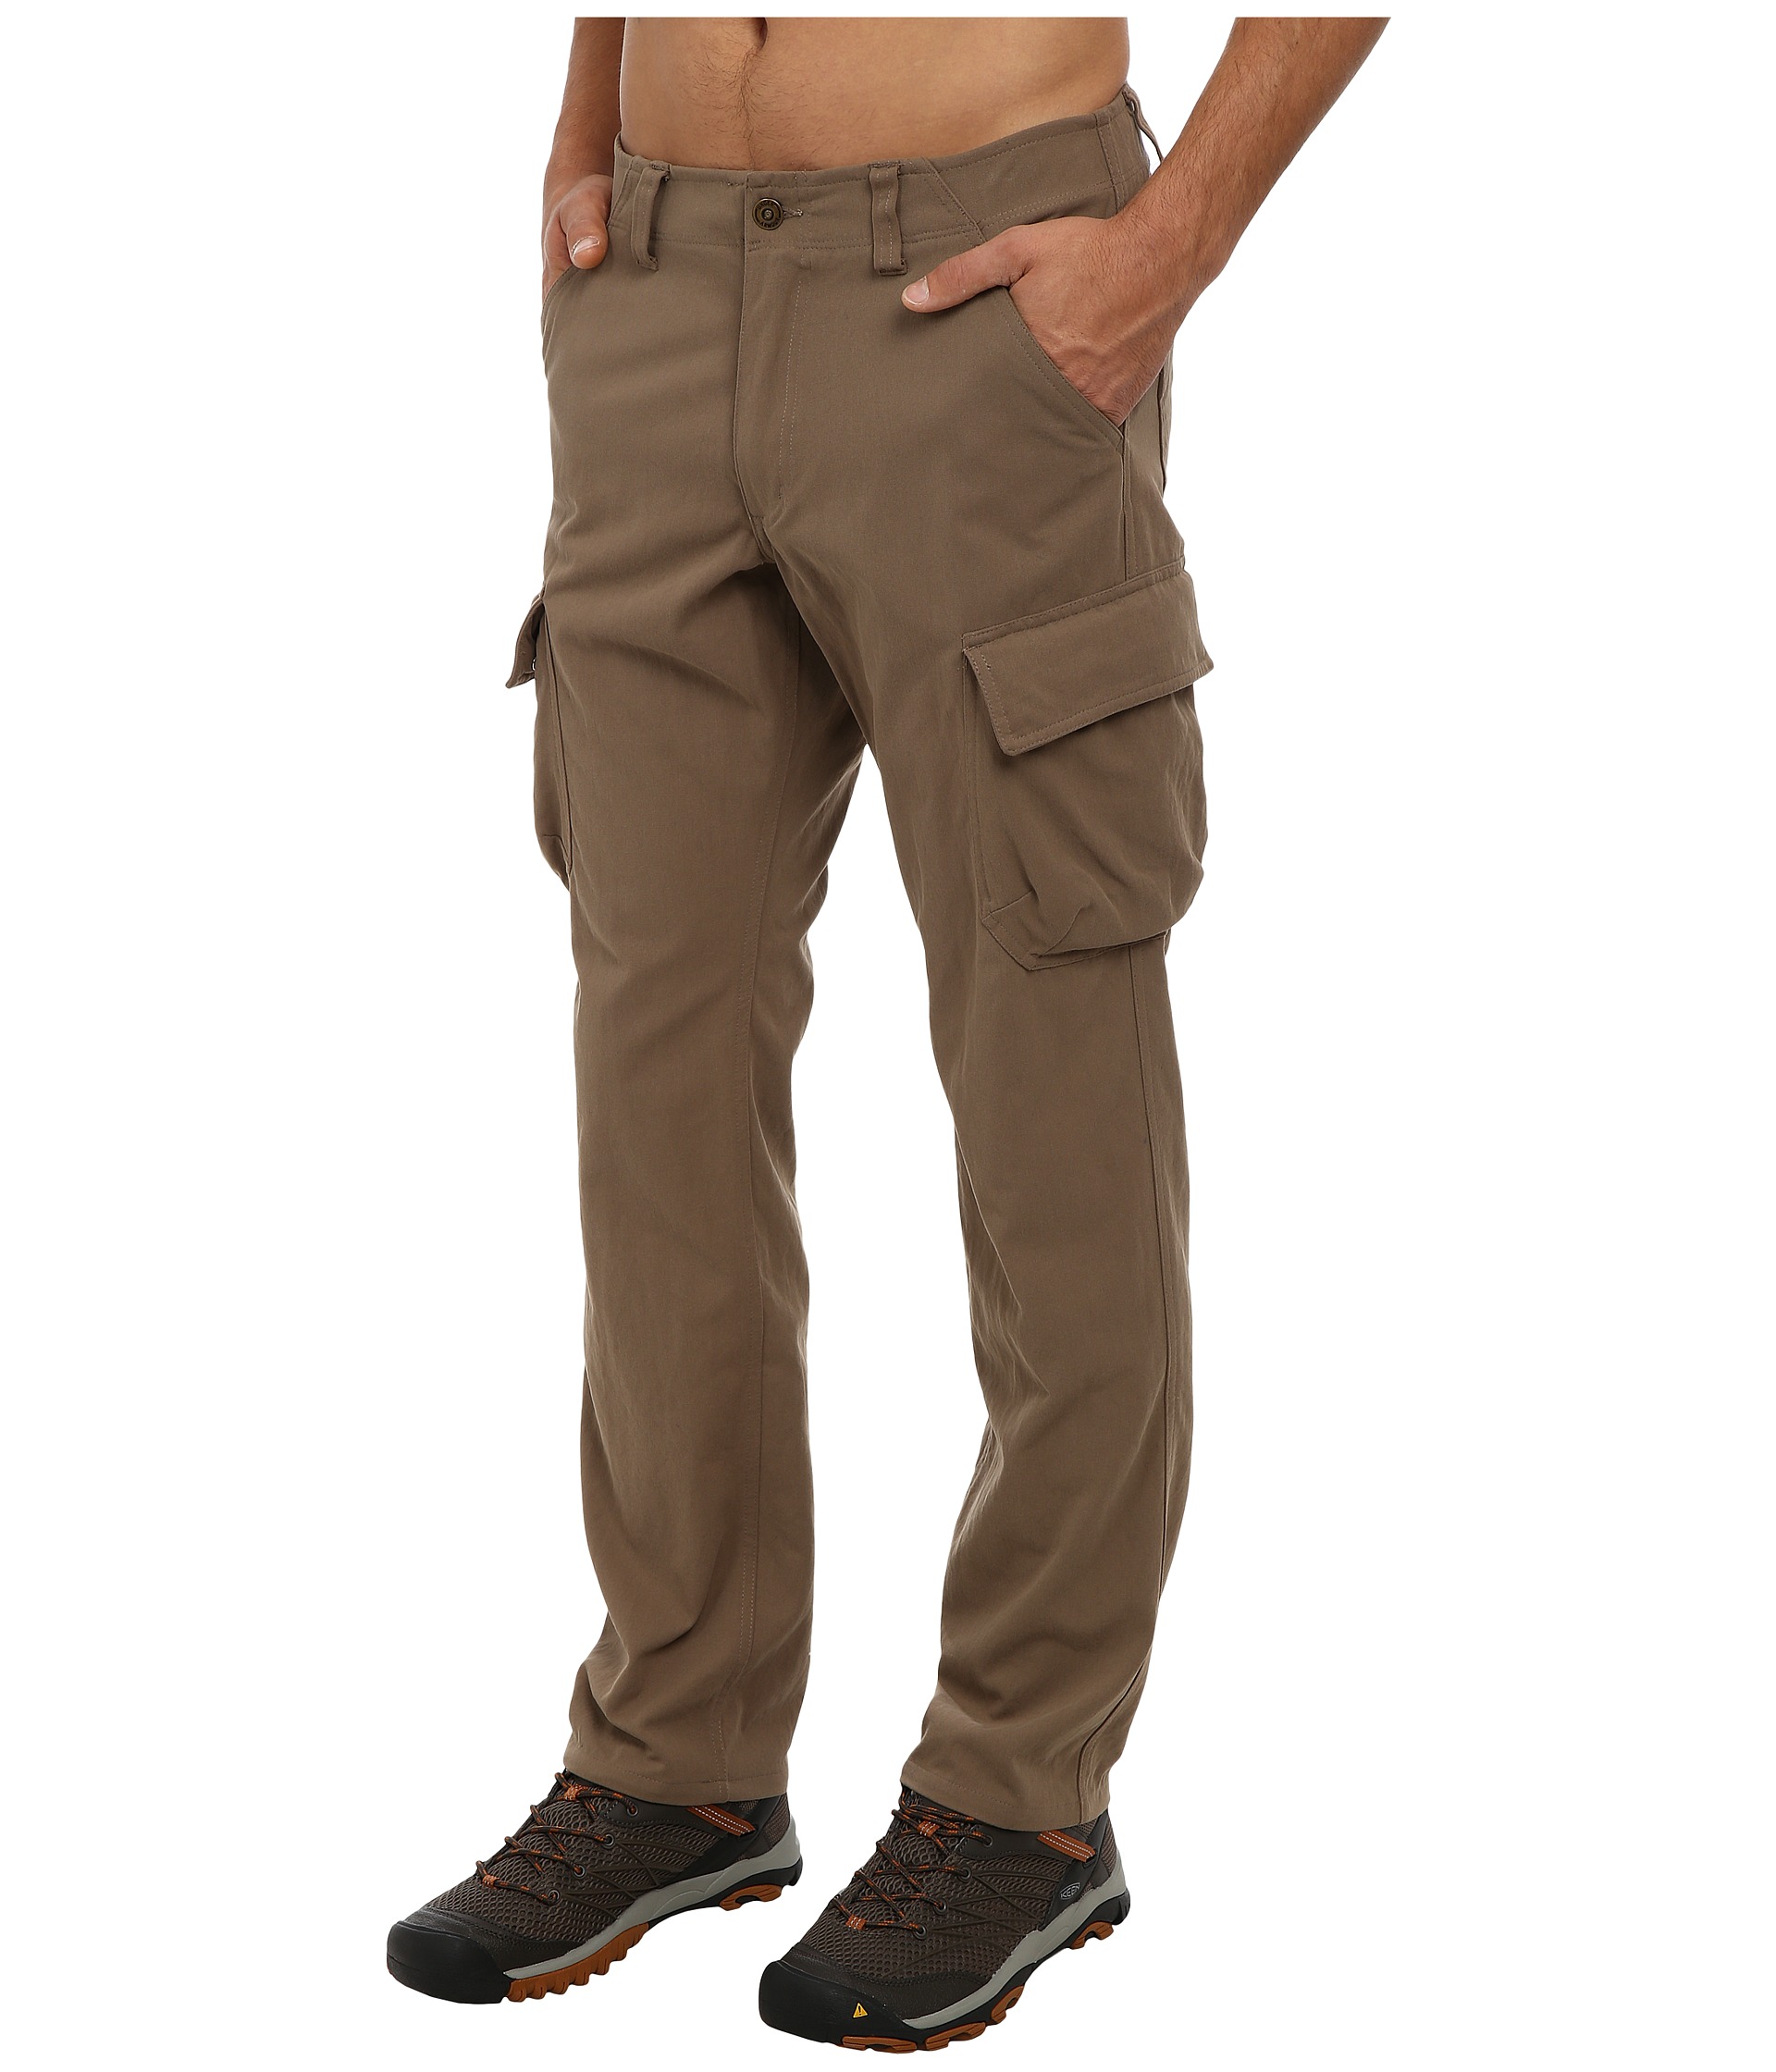 Under Armour Ua Grit Cargo Pant | Shipped Free at Zappos